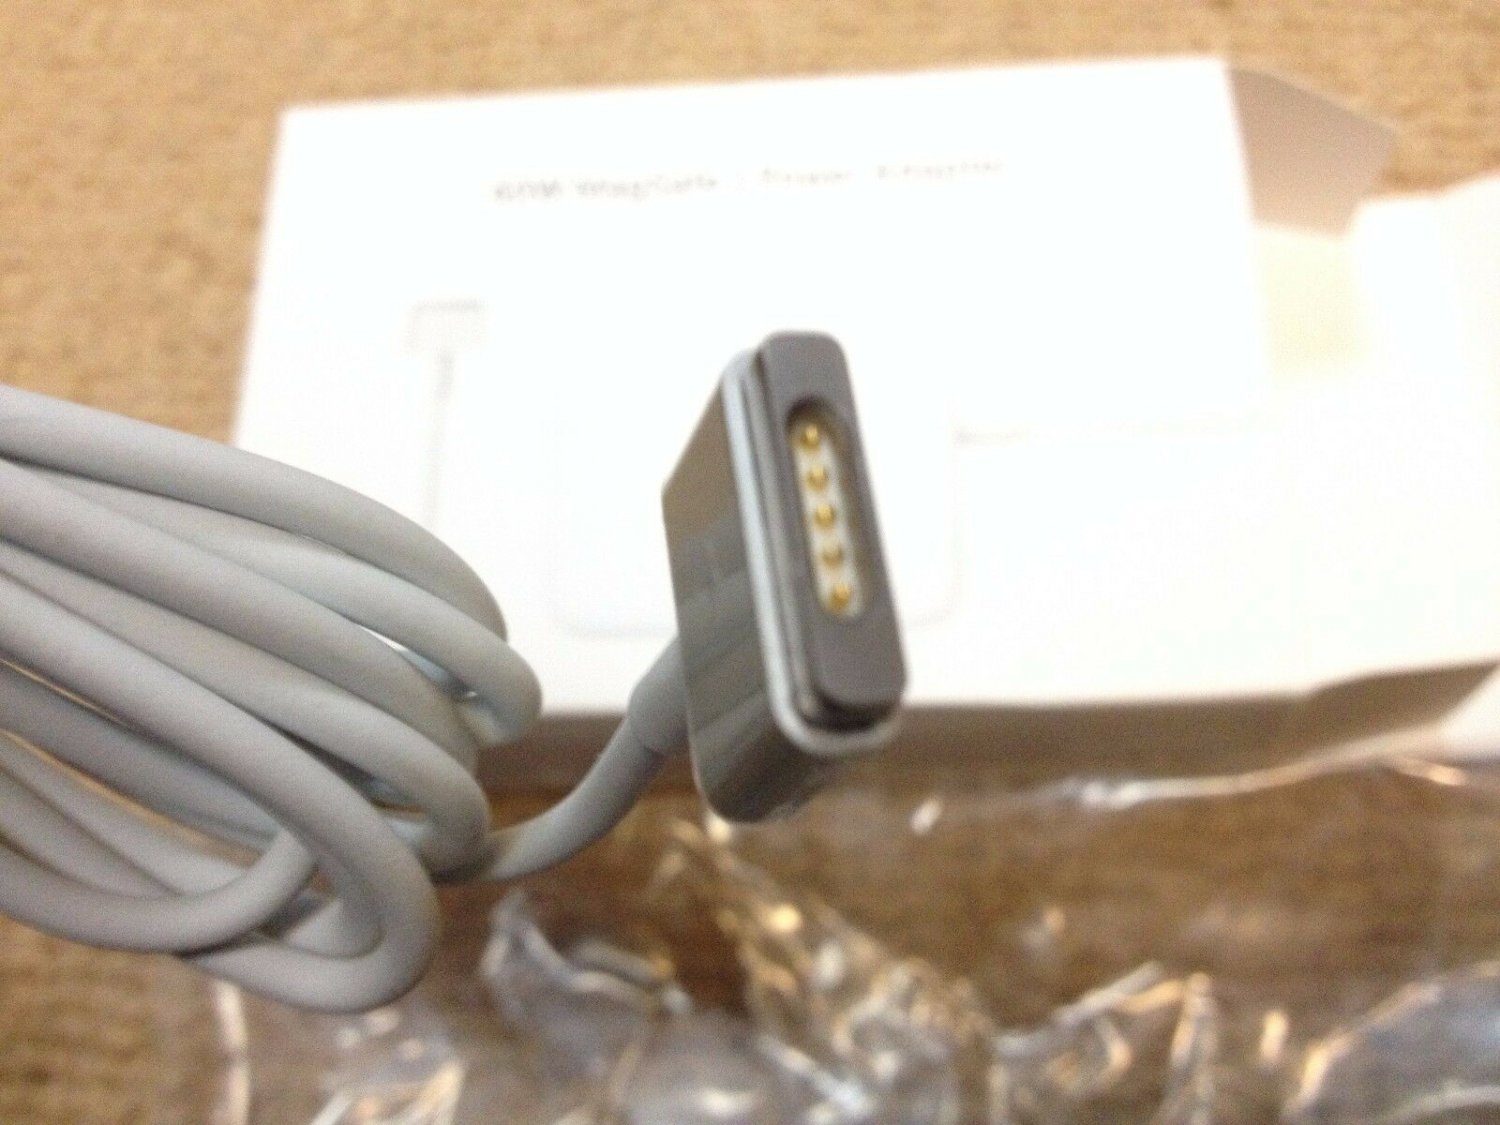 apple macbook model a1181 charger